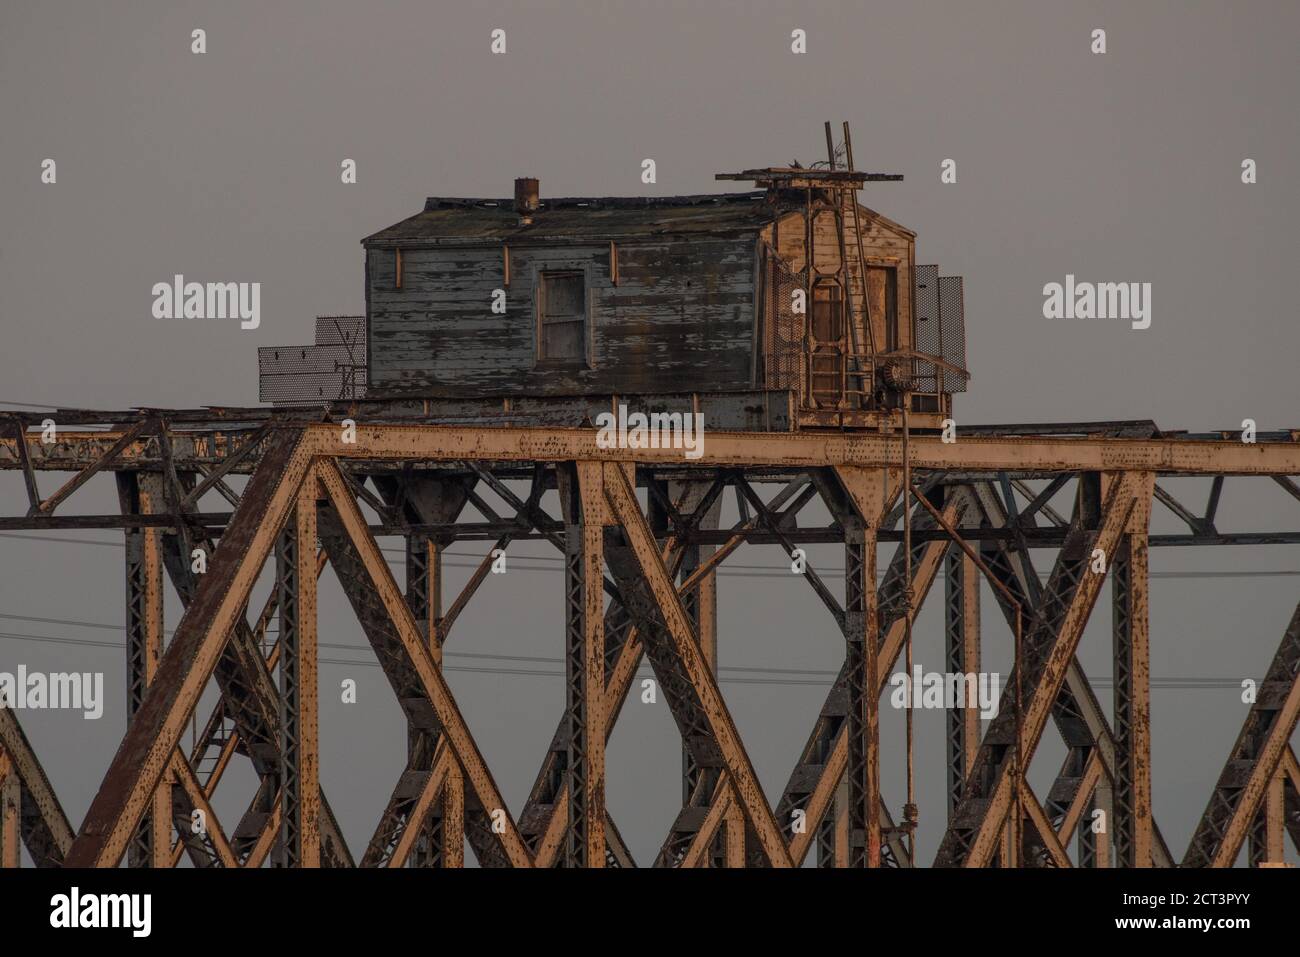 The Dunbarton rail bridge stands decommissioned and out of use, it used to be a railroad bridge across the San francisco bay. Stock Photo